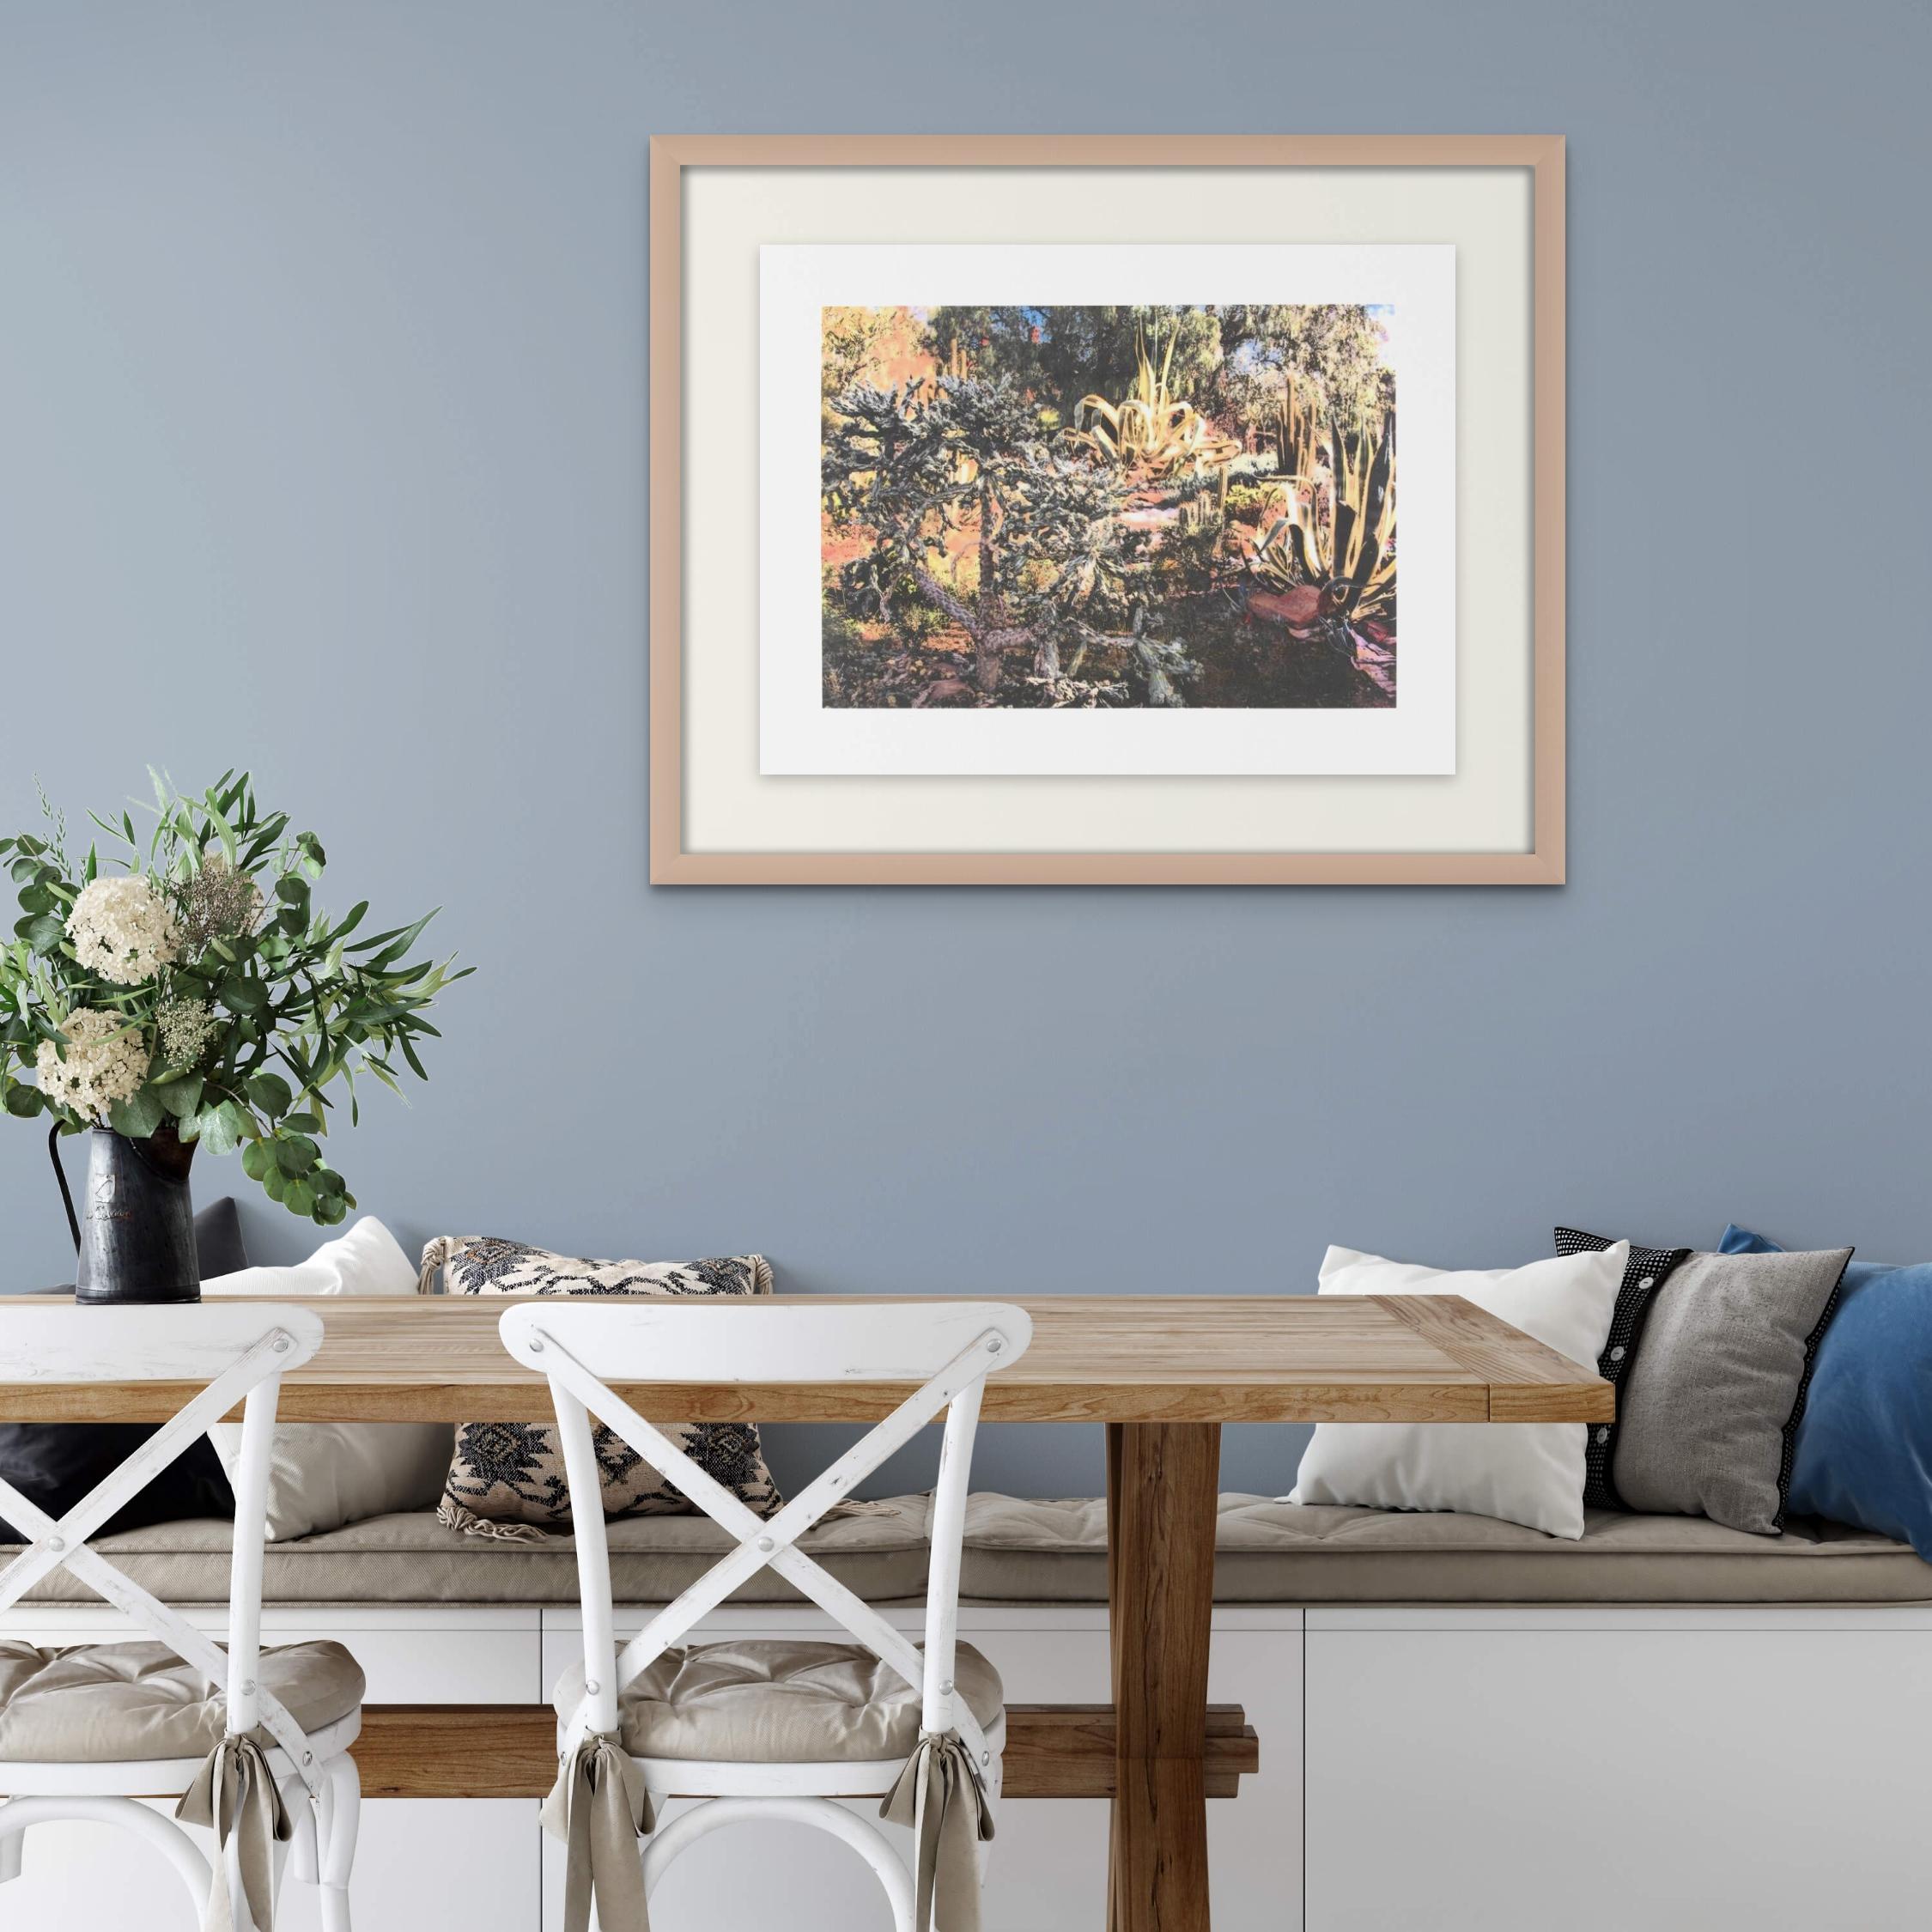 Fantastic garden succulent grotto - Terowie, polymergravure print, archival inkjet chine collé was created in a series of fantastic garden landscape prints, featuring photographs taken at Terowie in the mid-north of South Australia en-route to